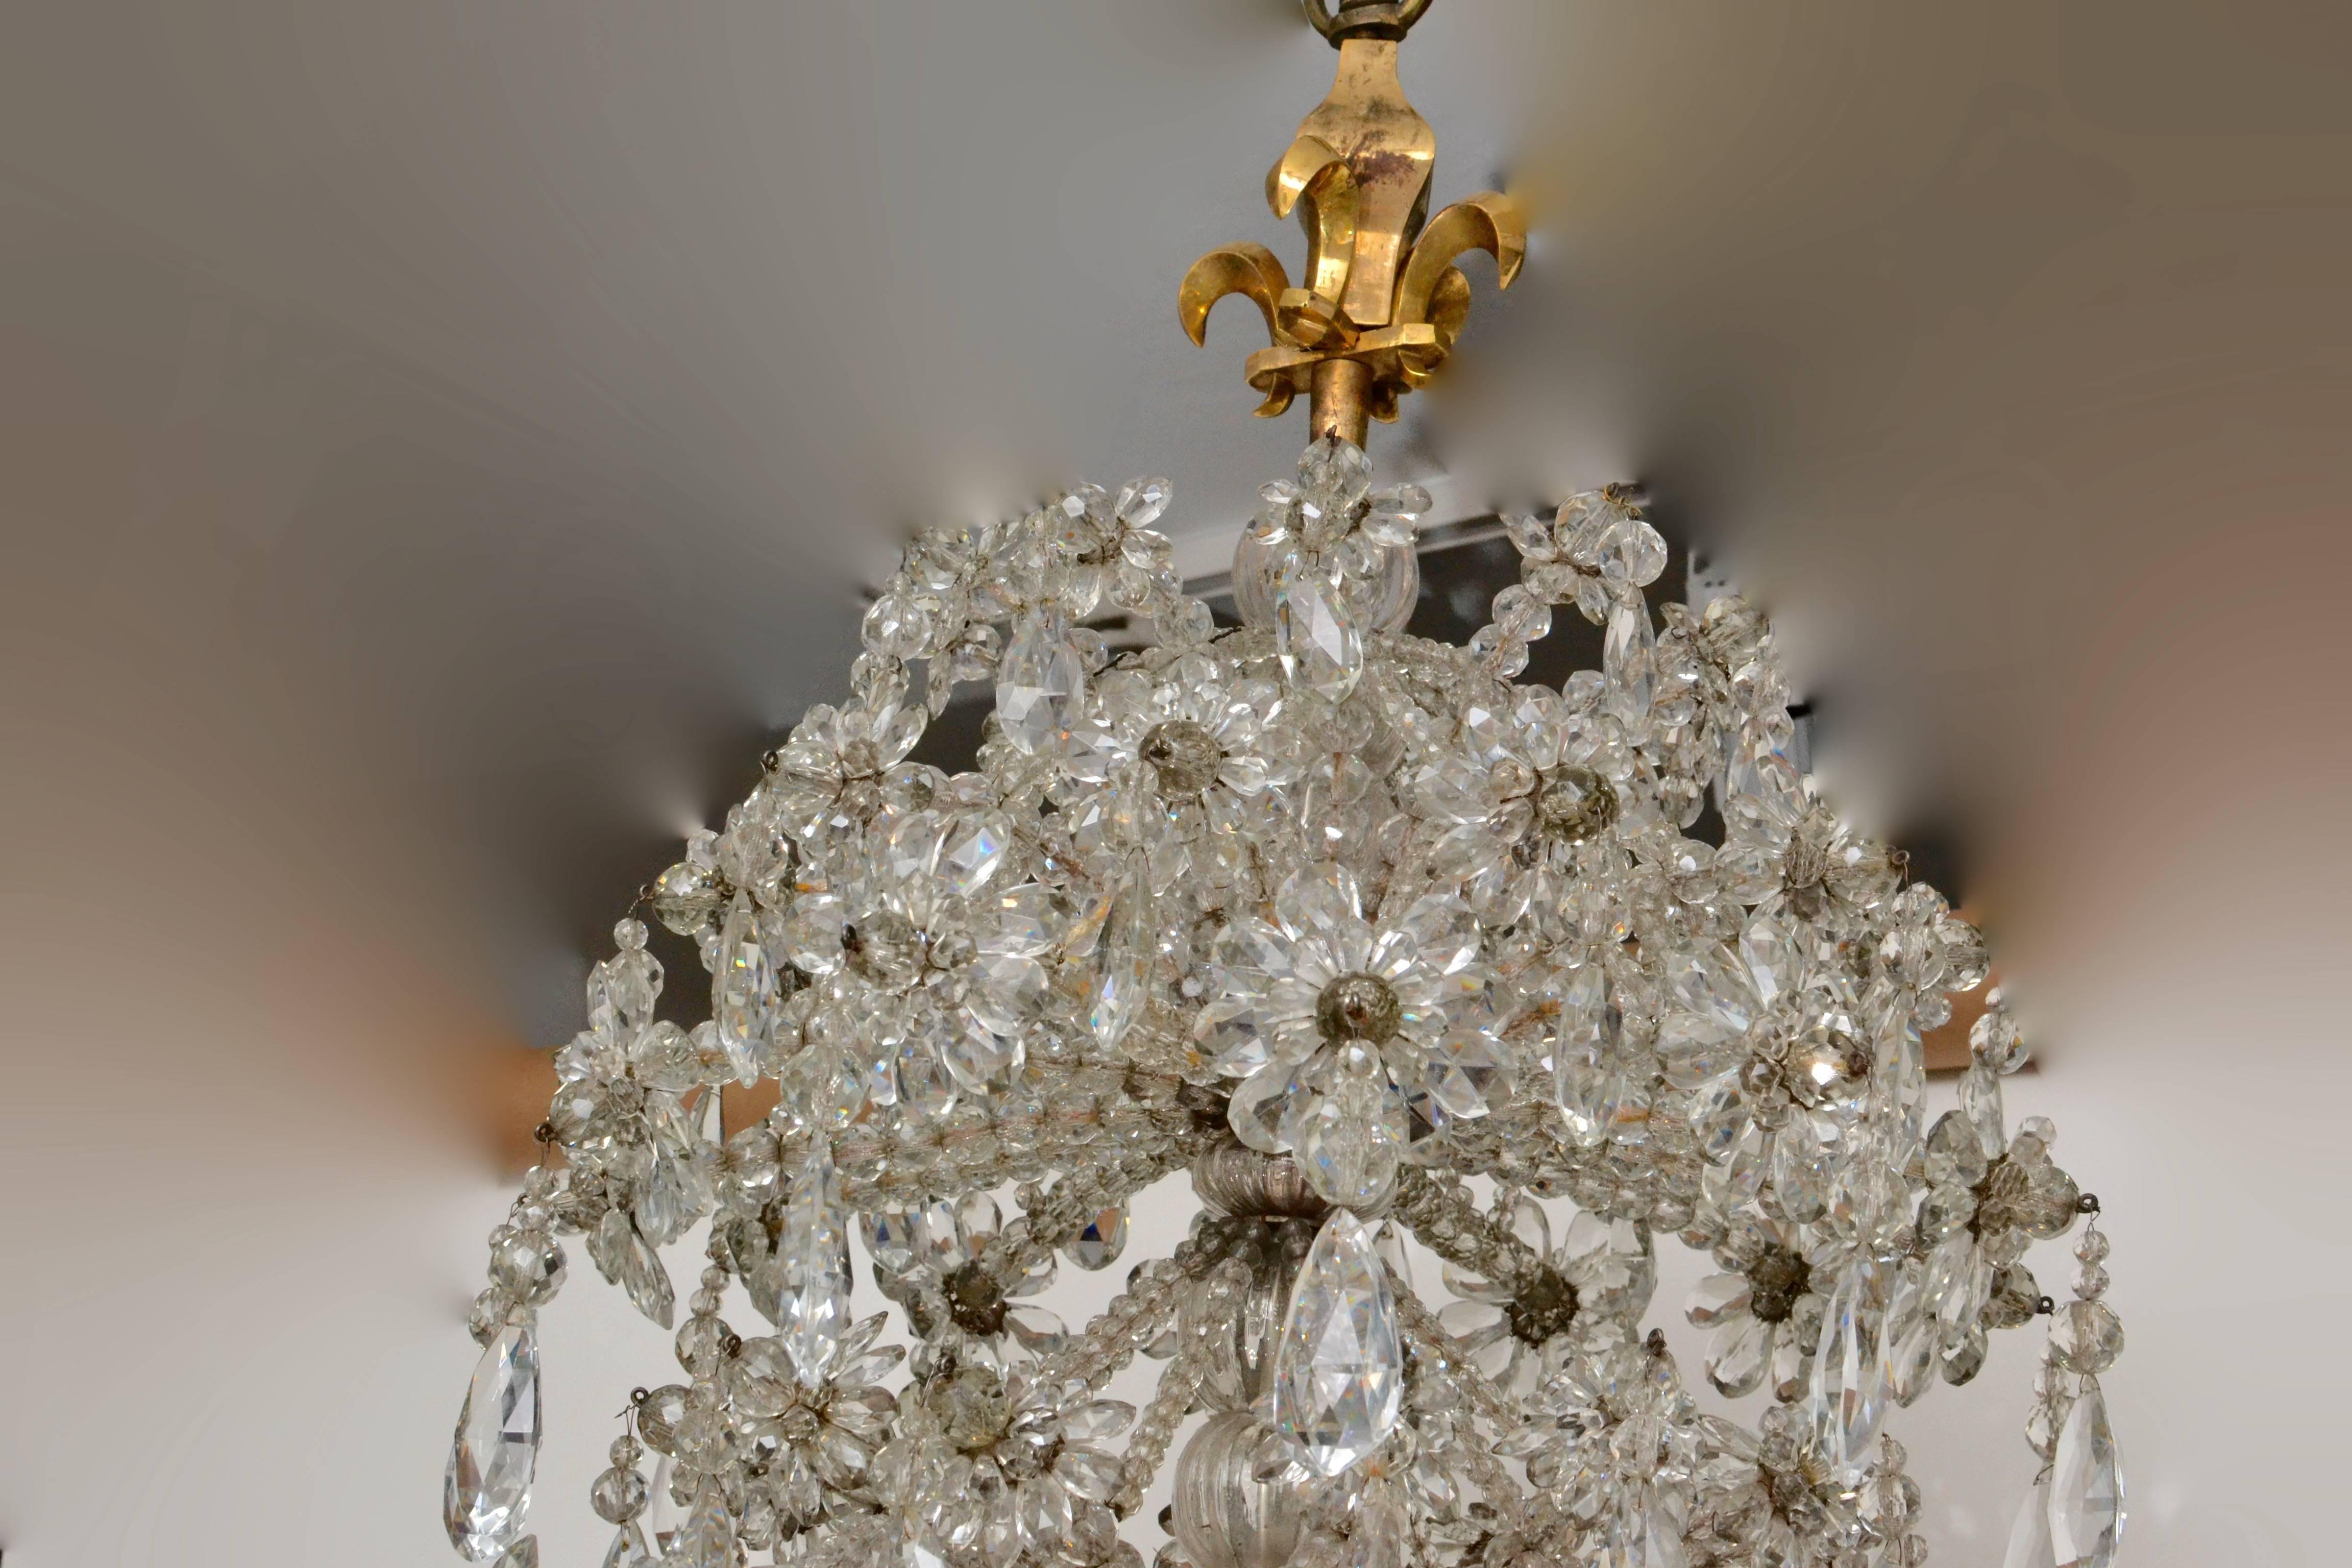 A very unusual crystal and gilt bronze chandelier of very Fine quality with no expensive saved in it’s making when made in Paris during the 19th century. It’s crowned with a double gilt bronze fleur-de-lis. The model is based on a French Louis XIV